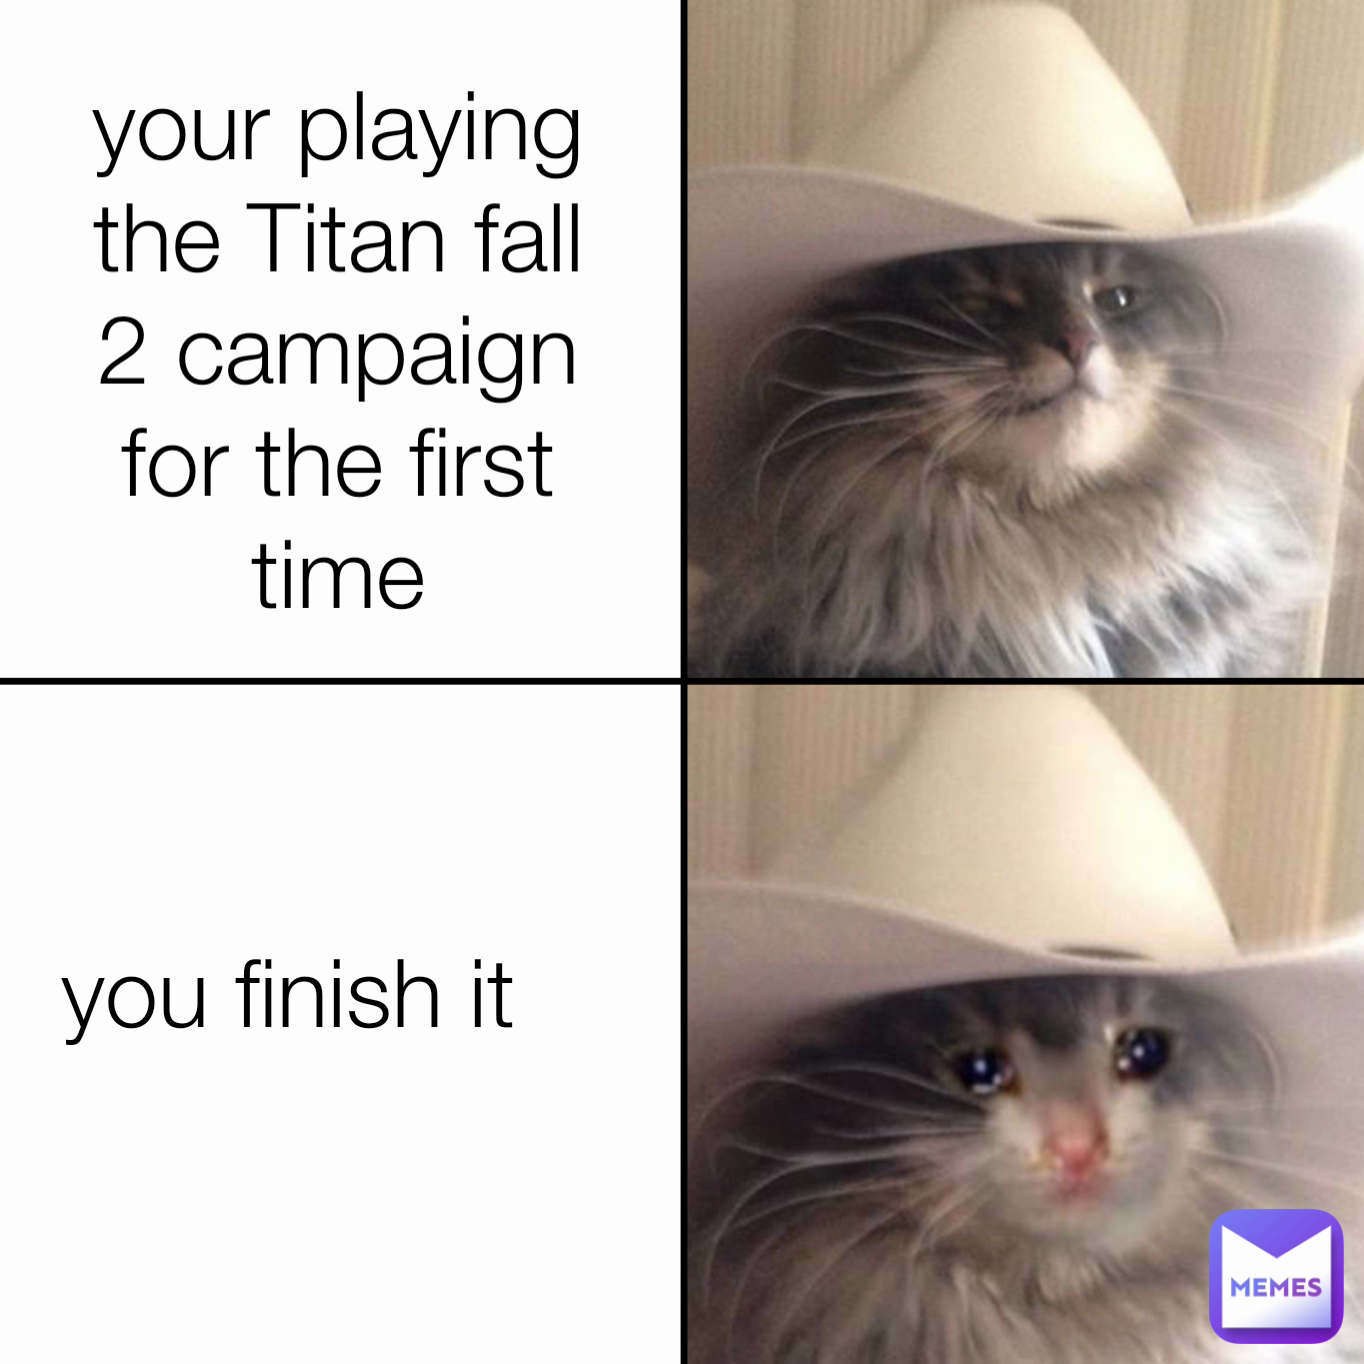 you finish it your playing the Titan fall 2 campaign for the first time